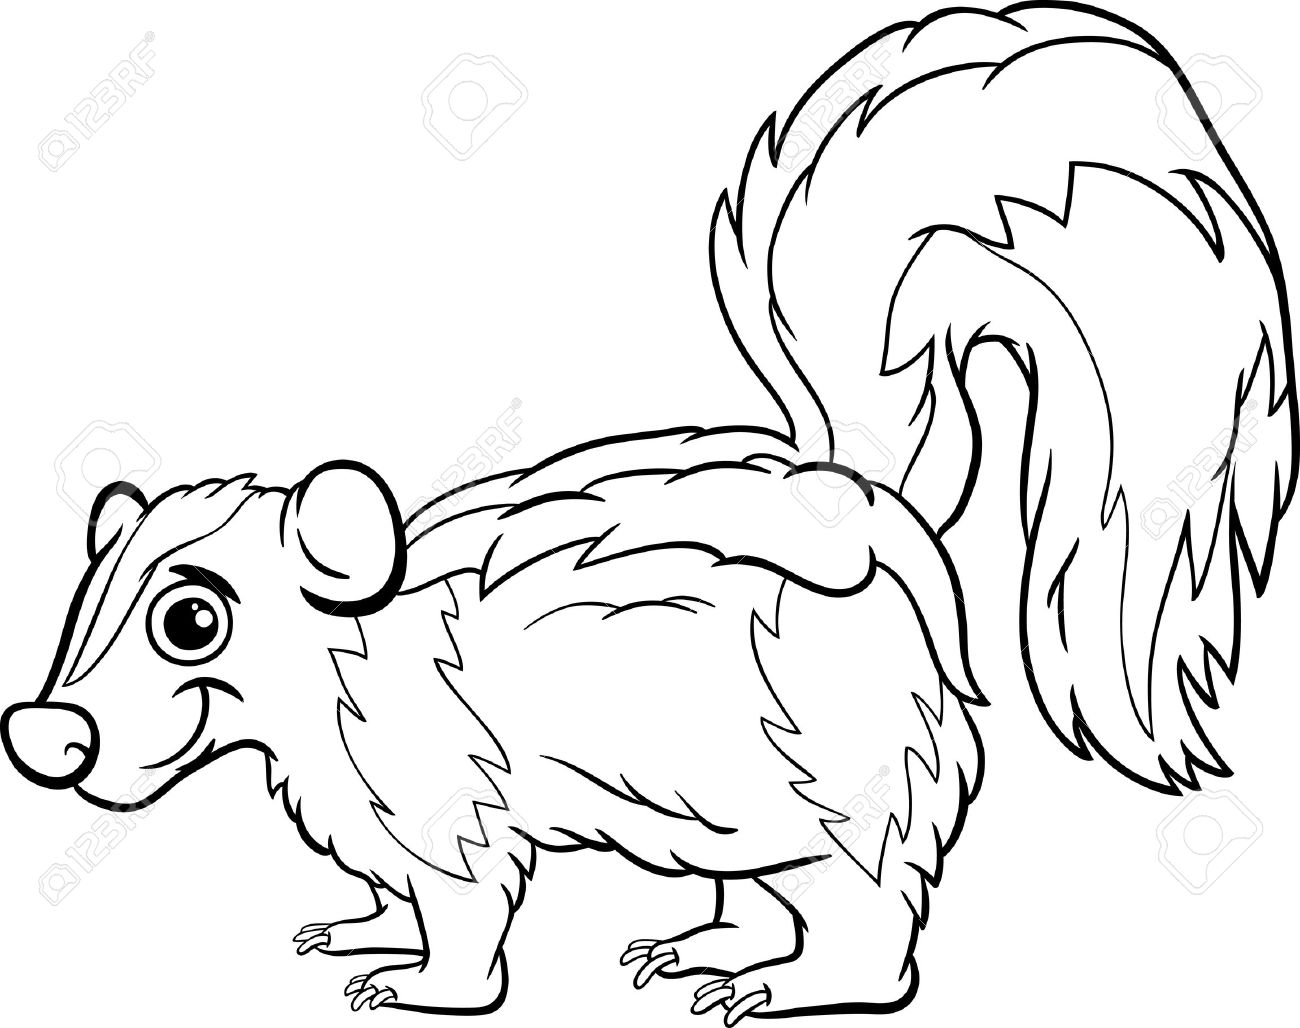 500 Skunk free clipart.